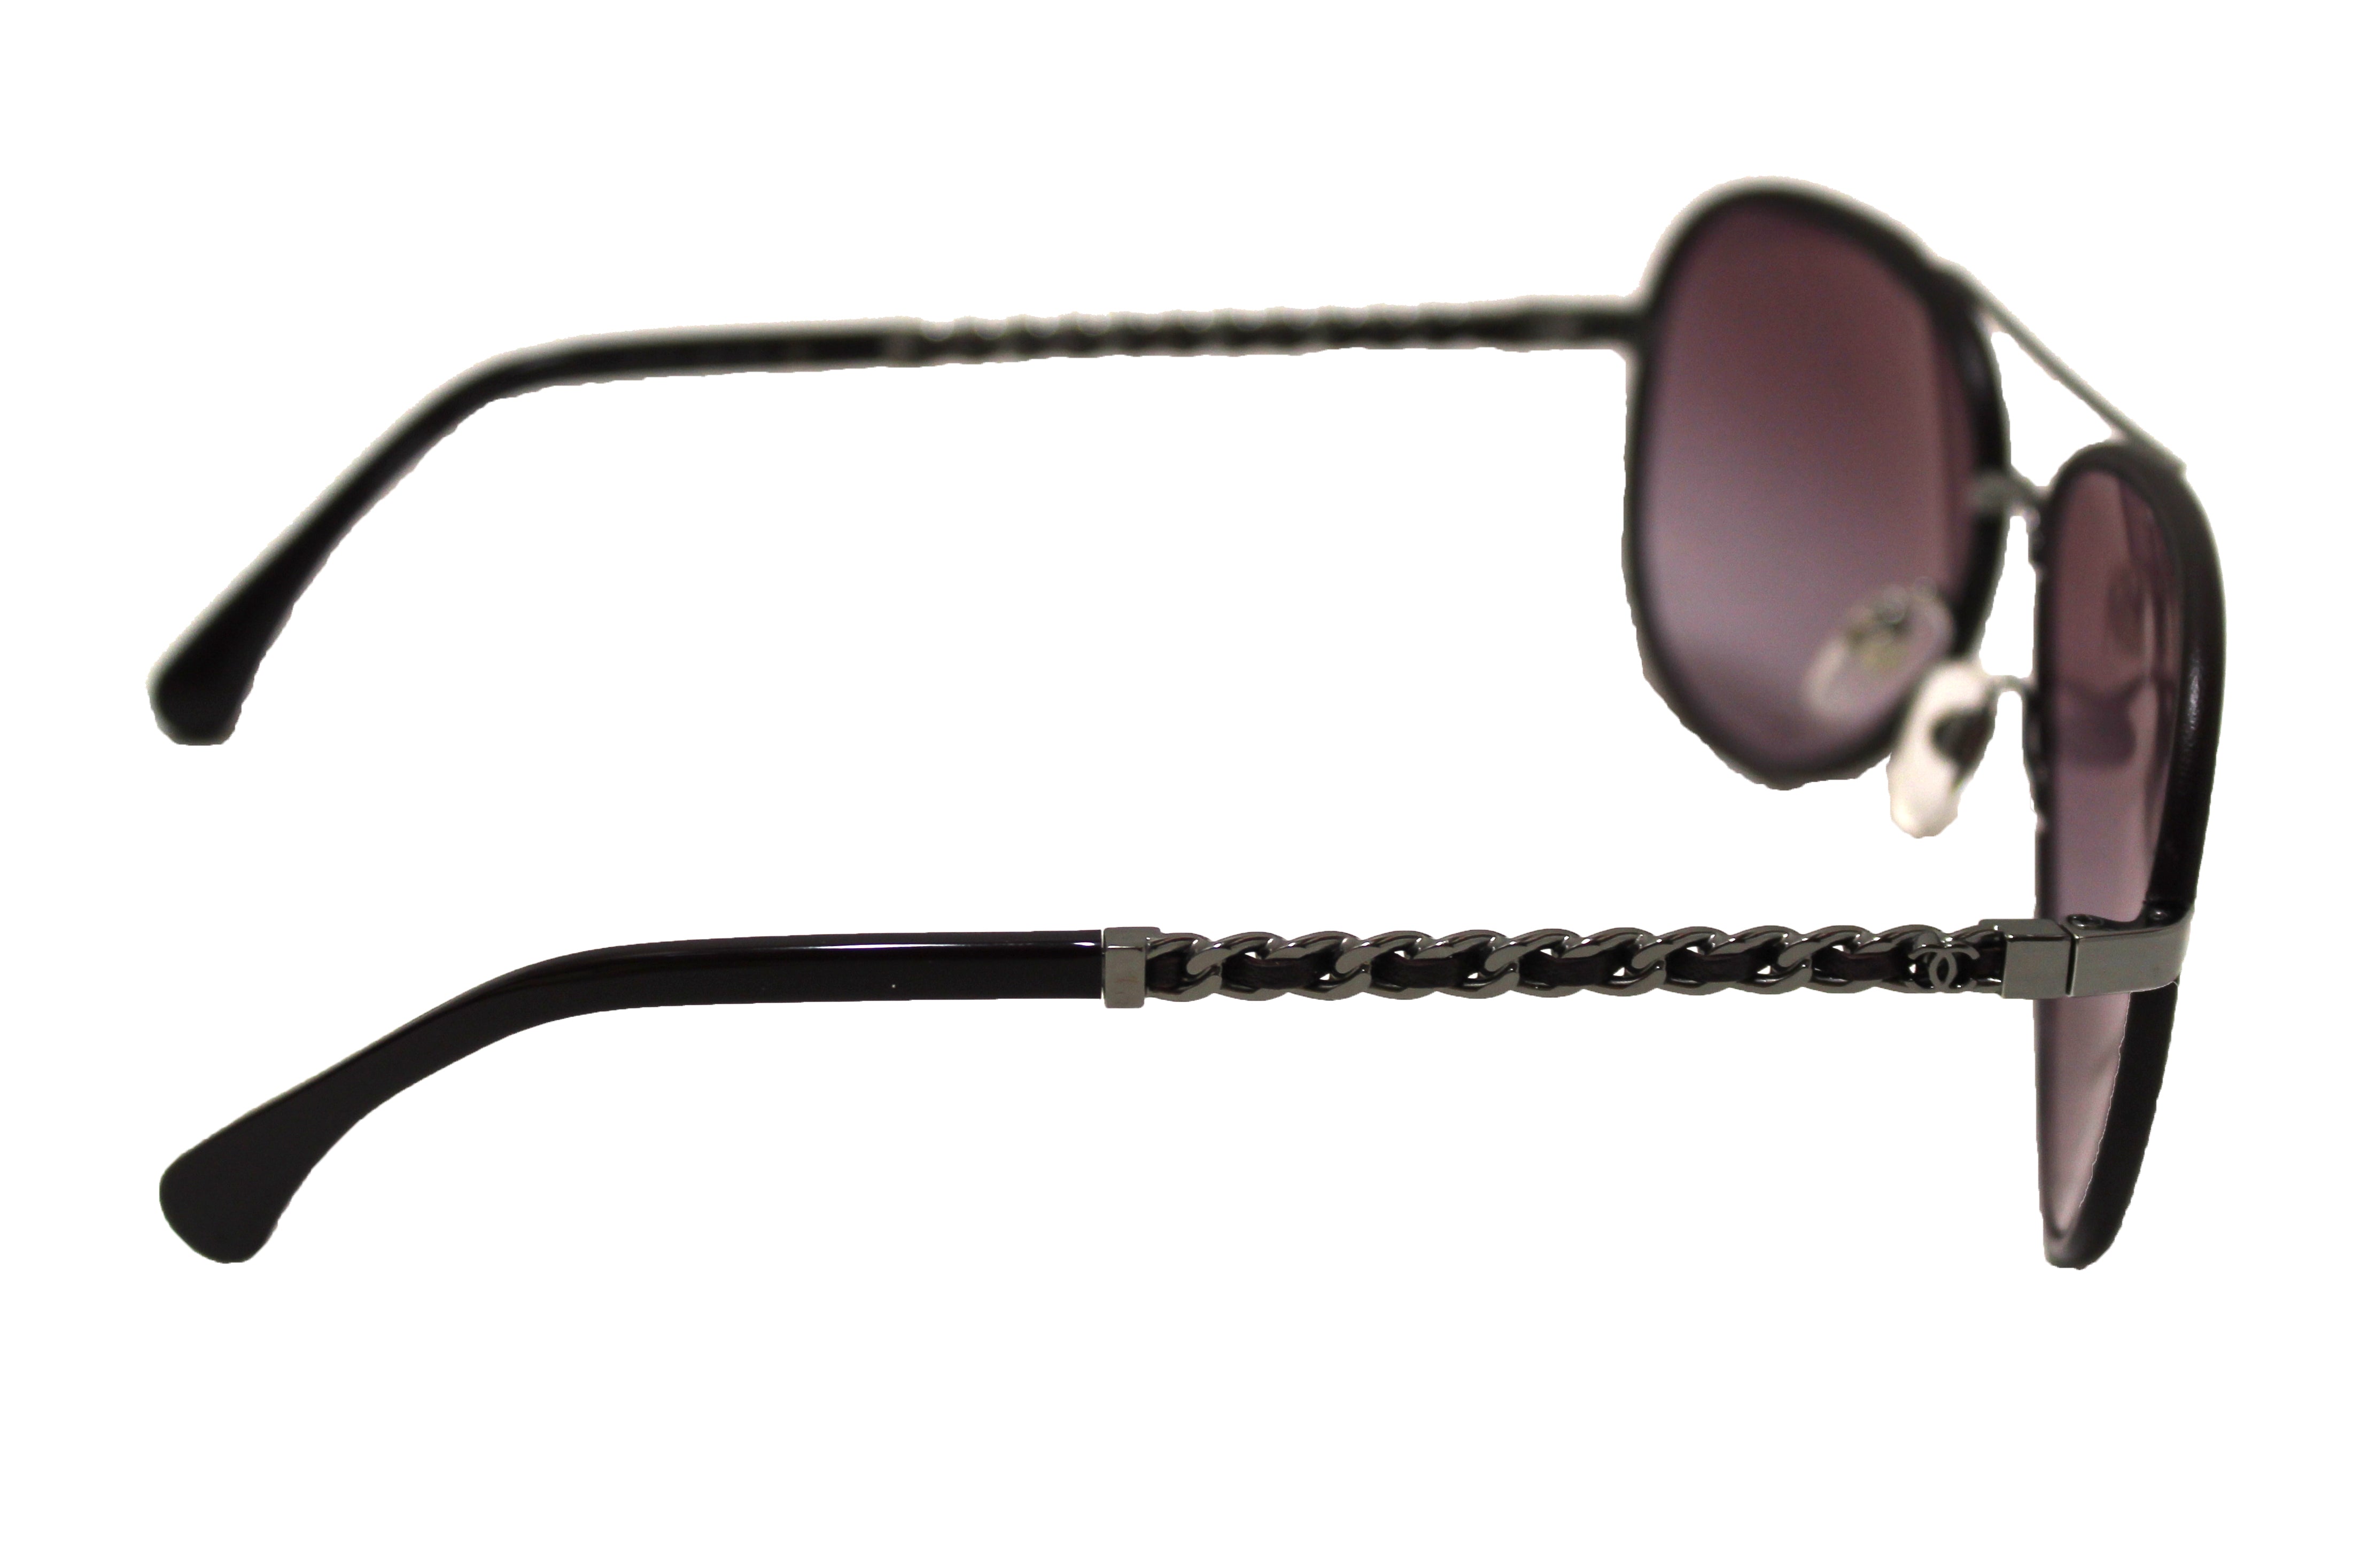 Authentic Chanel Black Sunglasses In Mother Of Pearl Monogram for